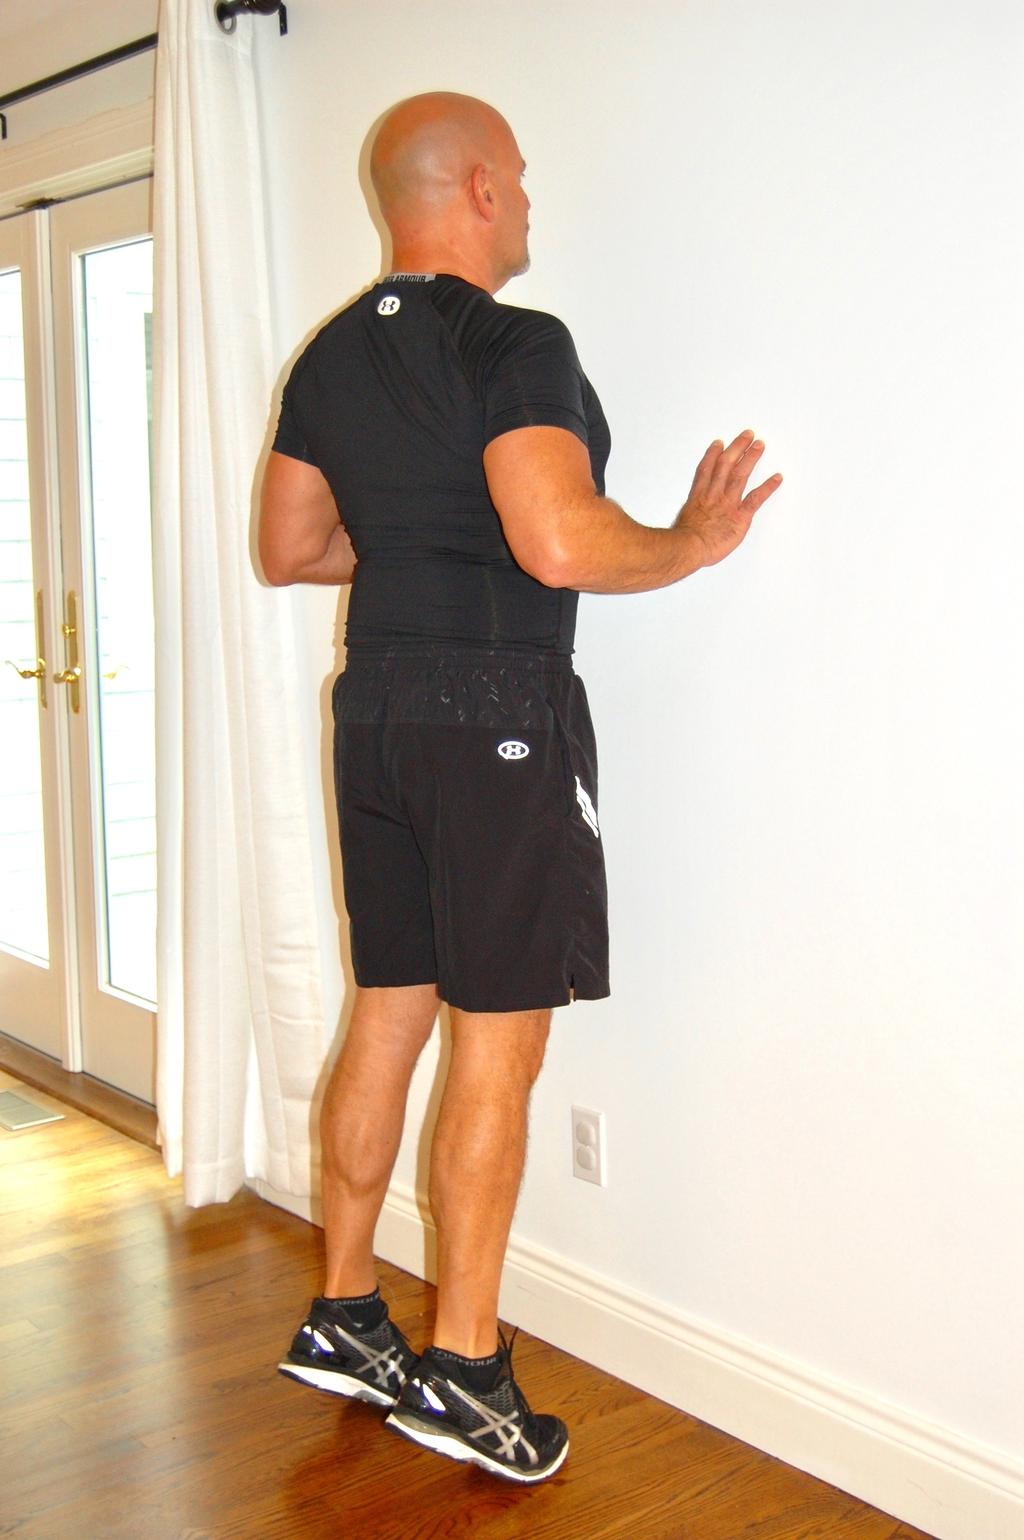 Standing Heel Lift This exercise strengthens the muscles in the back of your lower leg stops falls Stand facing wall with good posture Put your hands up on a wall Lift heels as high as can to ceiling